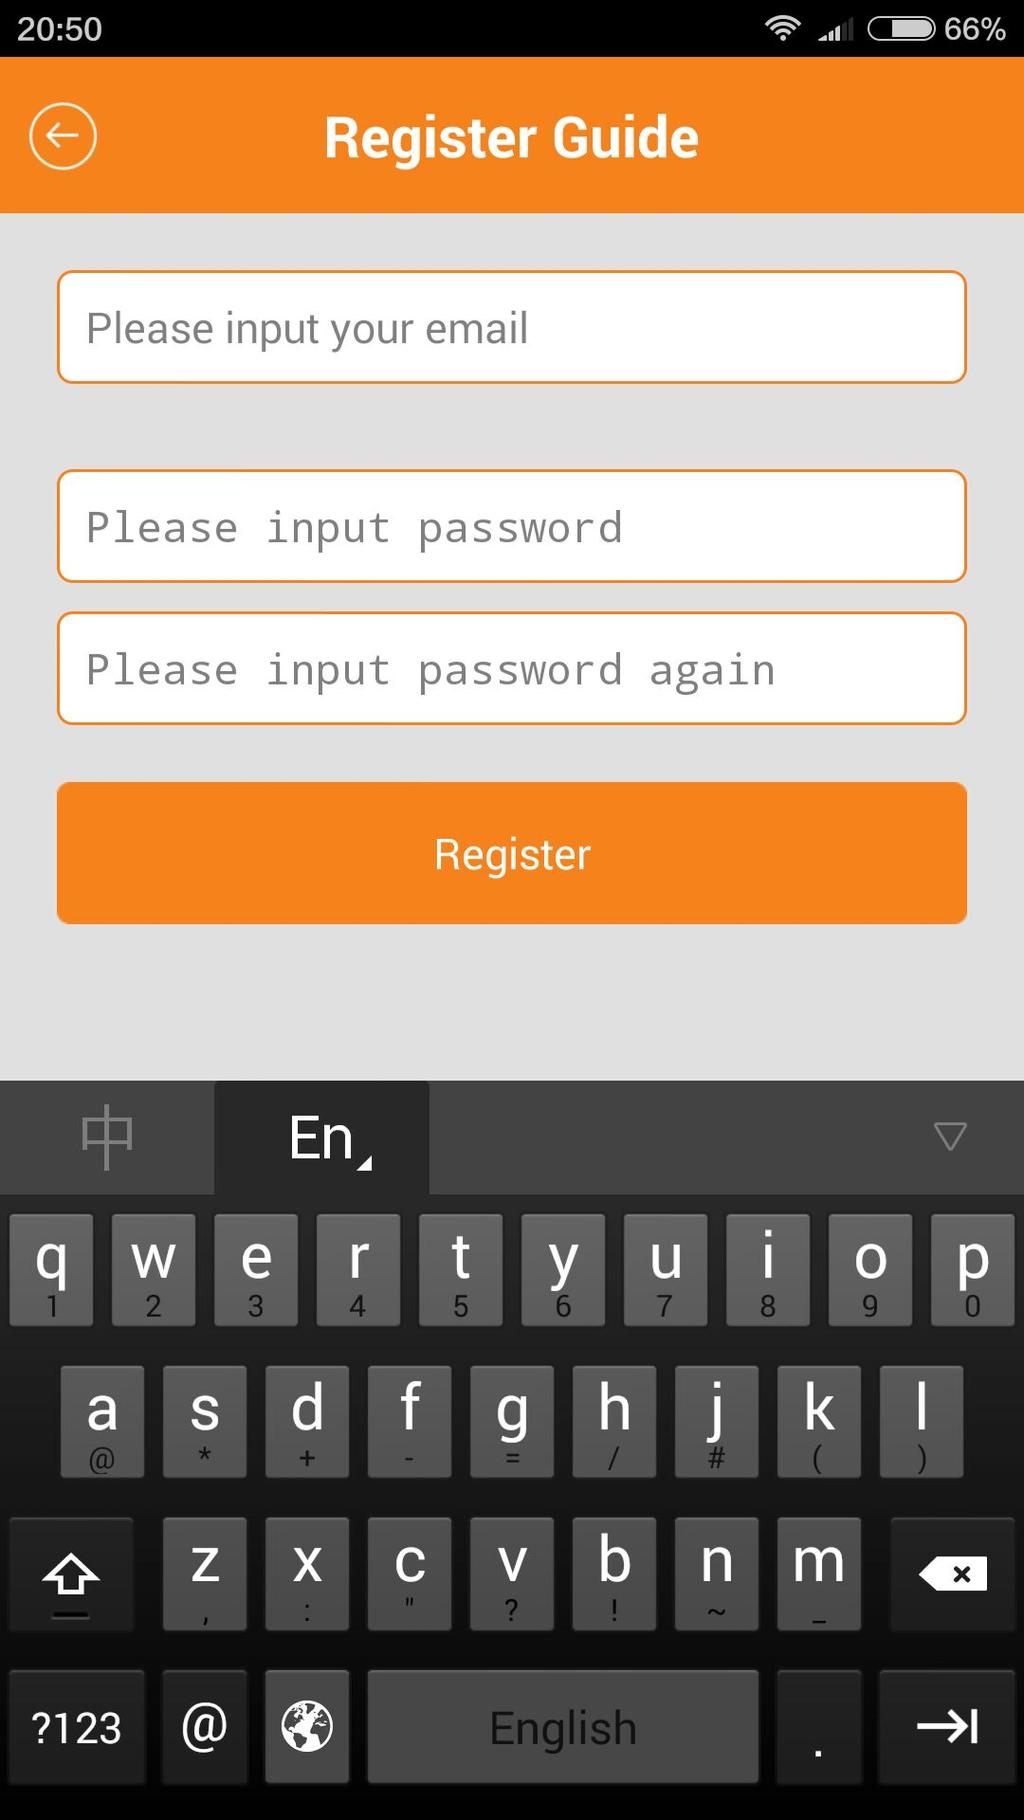 If you have registered an account, you can directly input your email address or ID number and password to log-in.